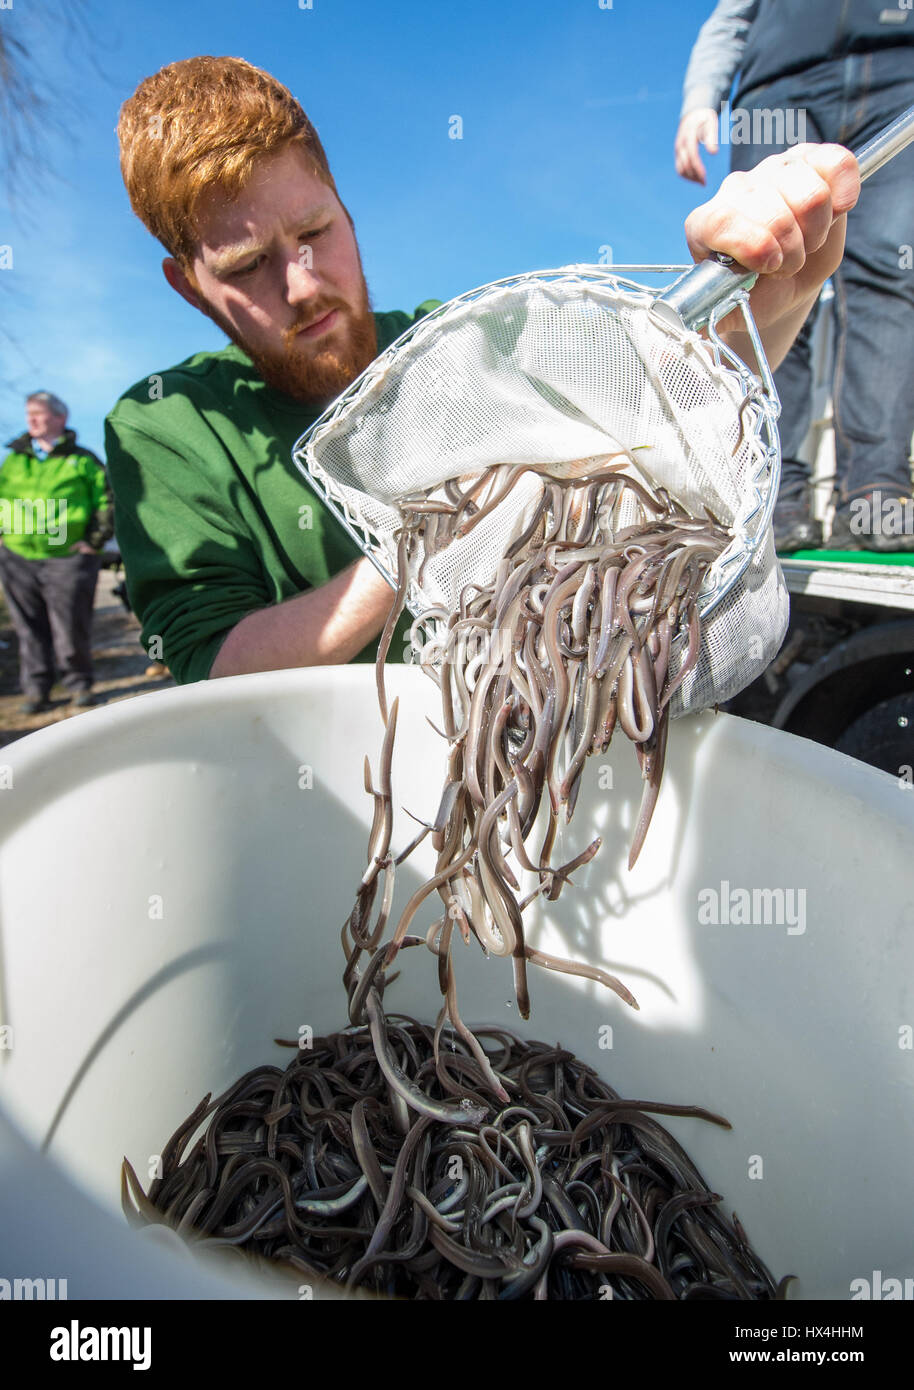 Aerial View Bucket Fish Net and Glass Eels Stock Photo - Image of  cooperation, atlantic: 224115470